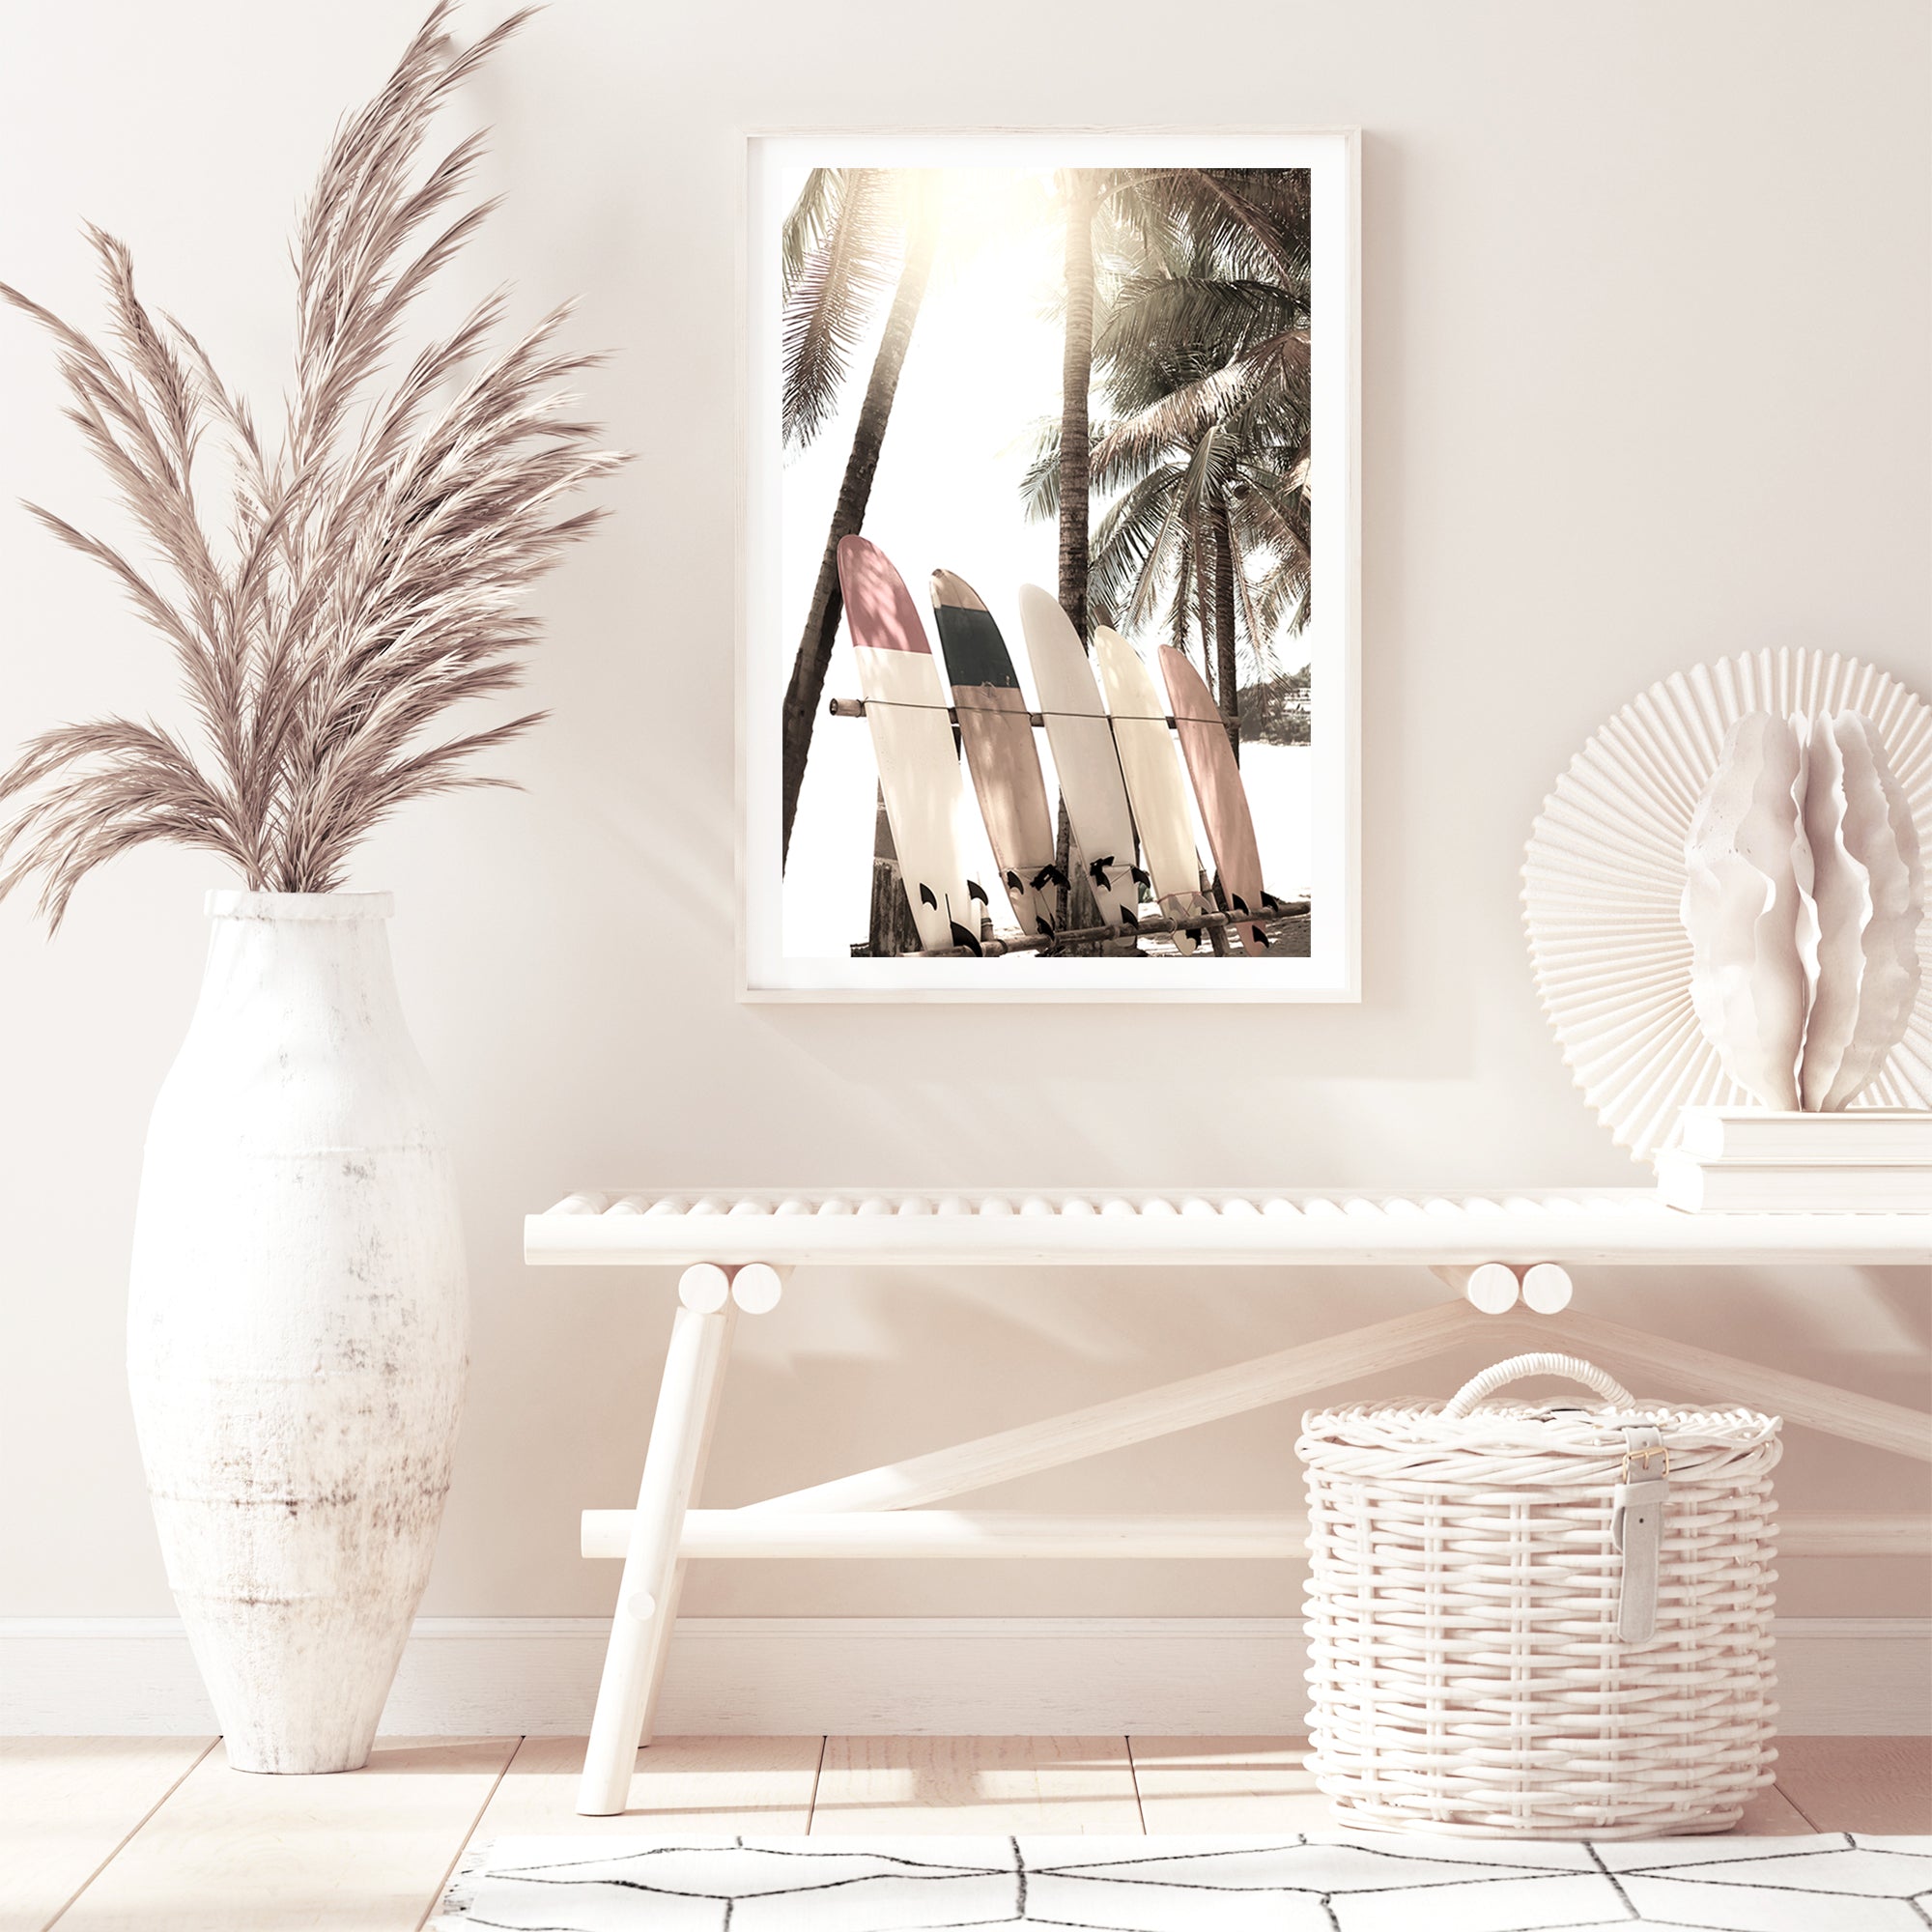 A photo artwork of four white surf boards under the palm trees with a tropical sunset available in canvas and art print.